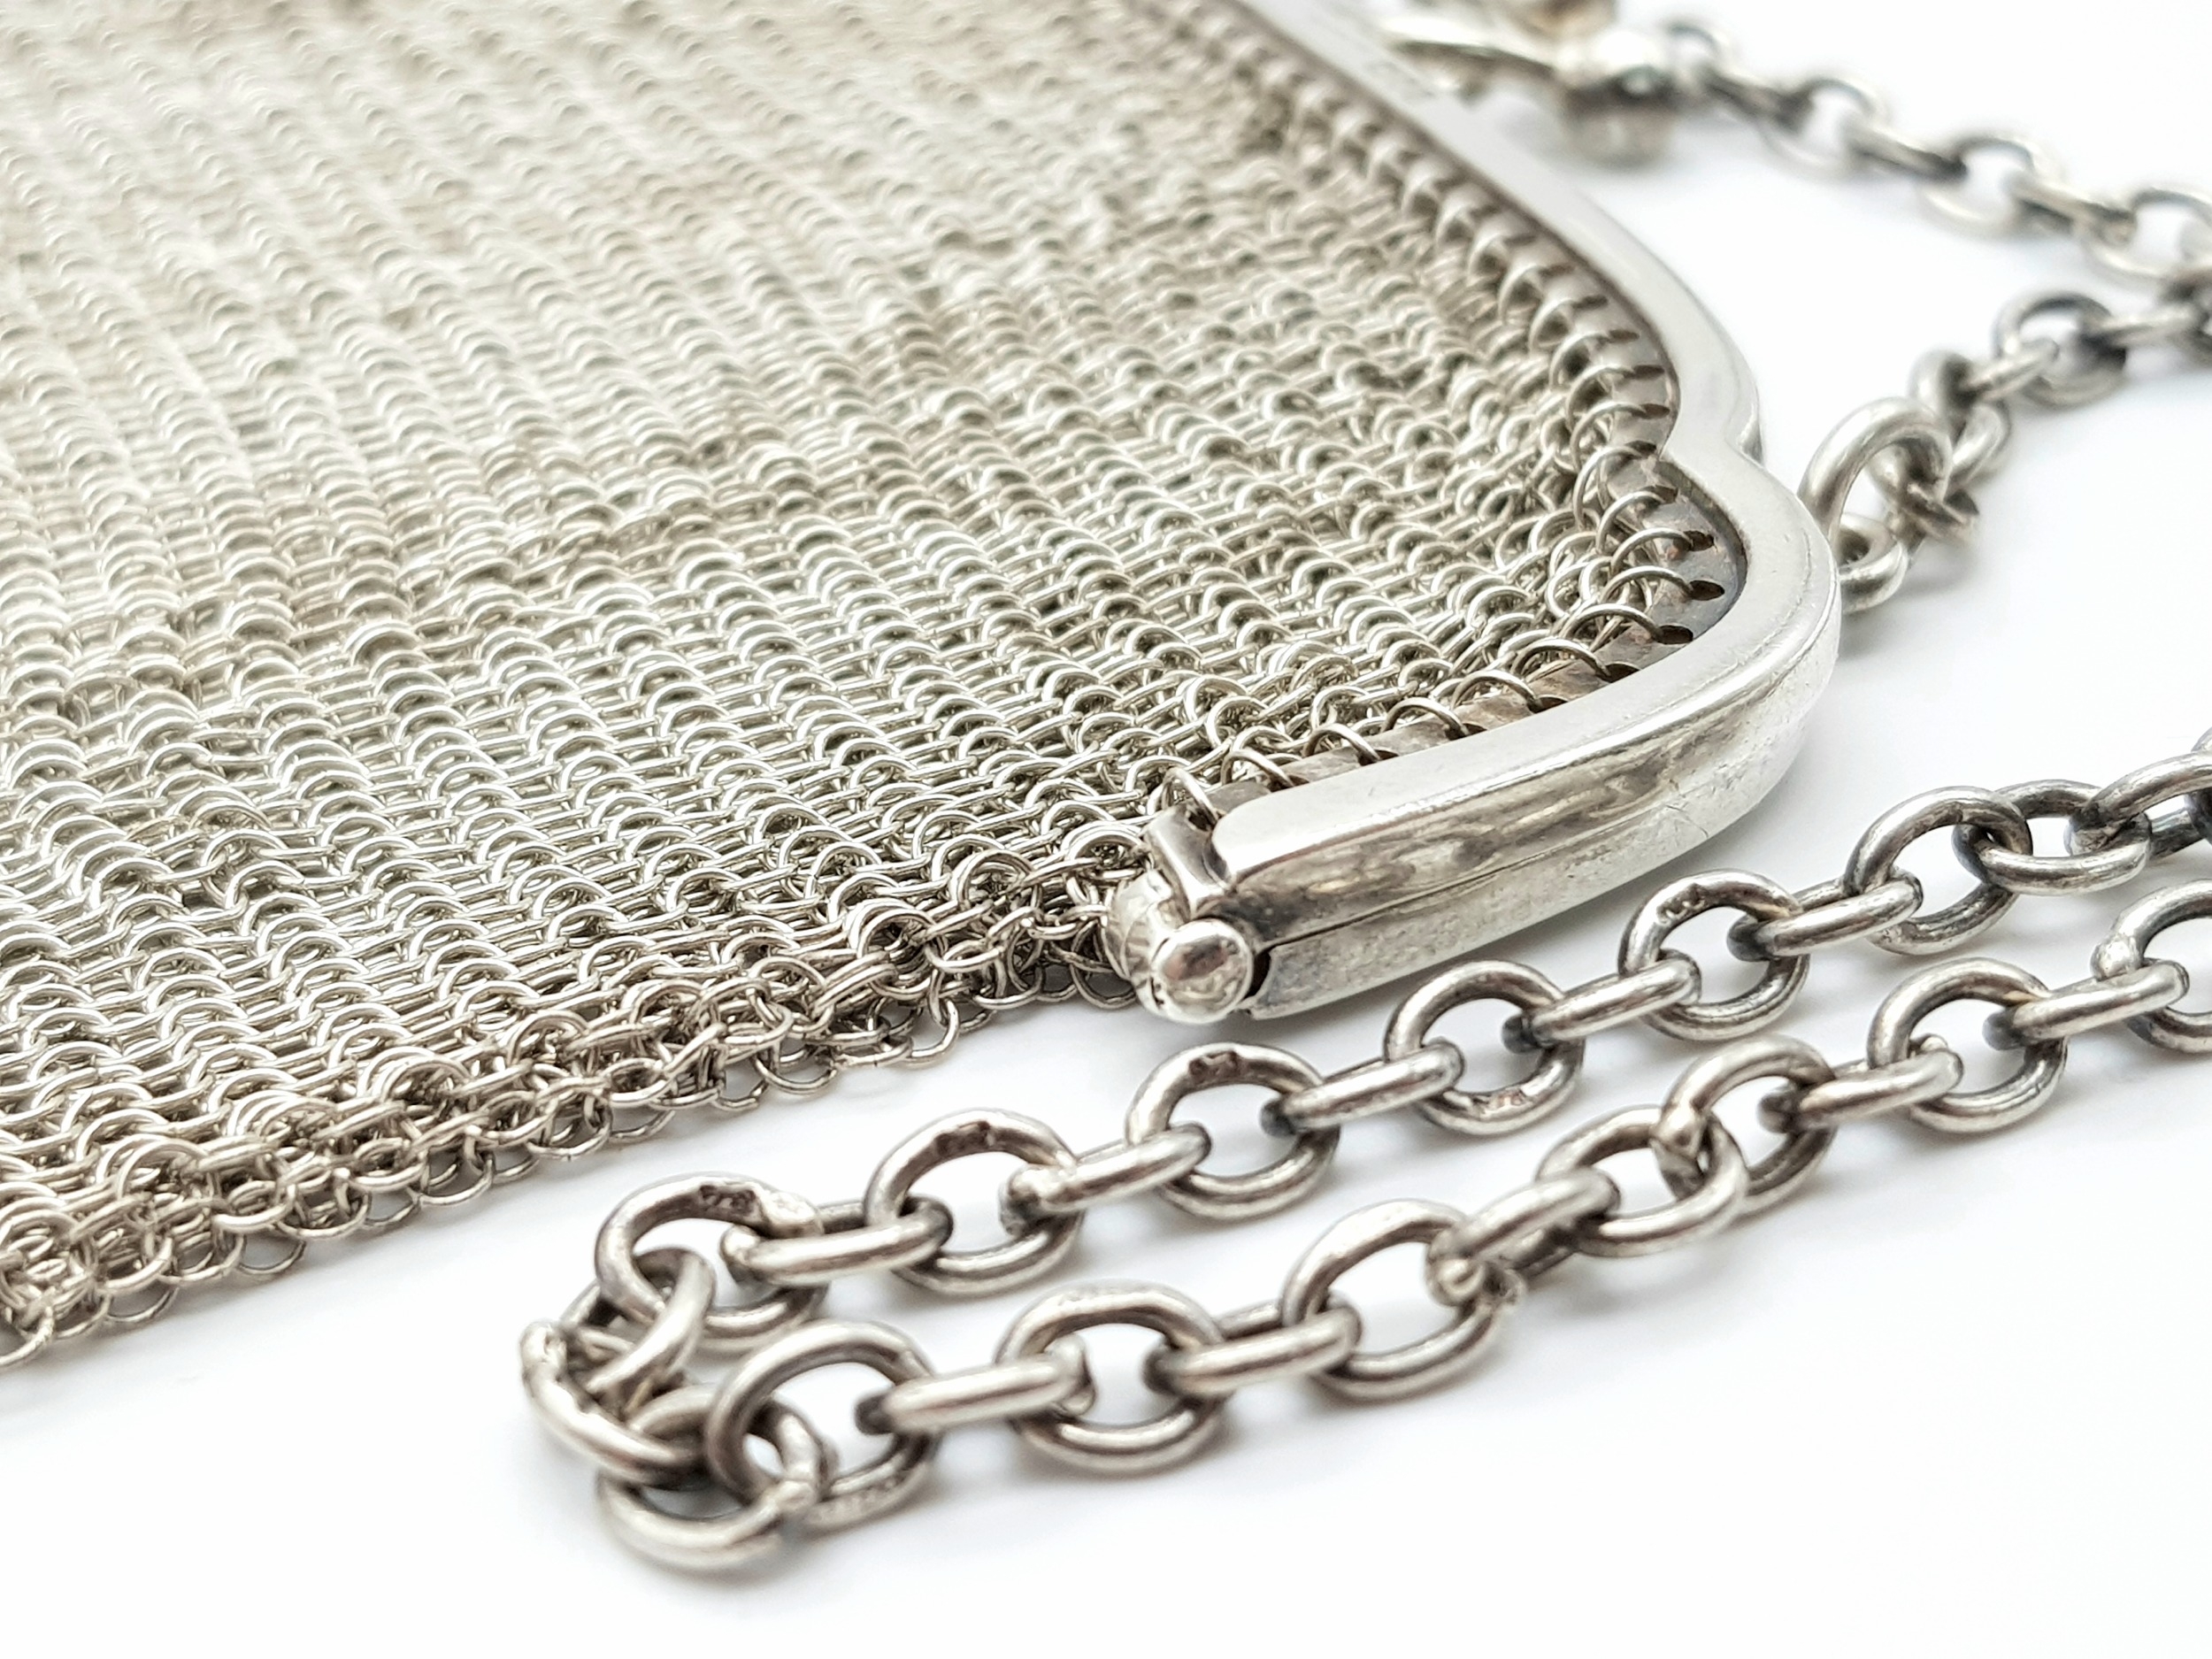 An Antique Silver Chain Link Purse. Hallmarks for London, 1915. 12cm length x 9cm height. 91g - Image 2 of 5